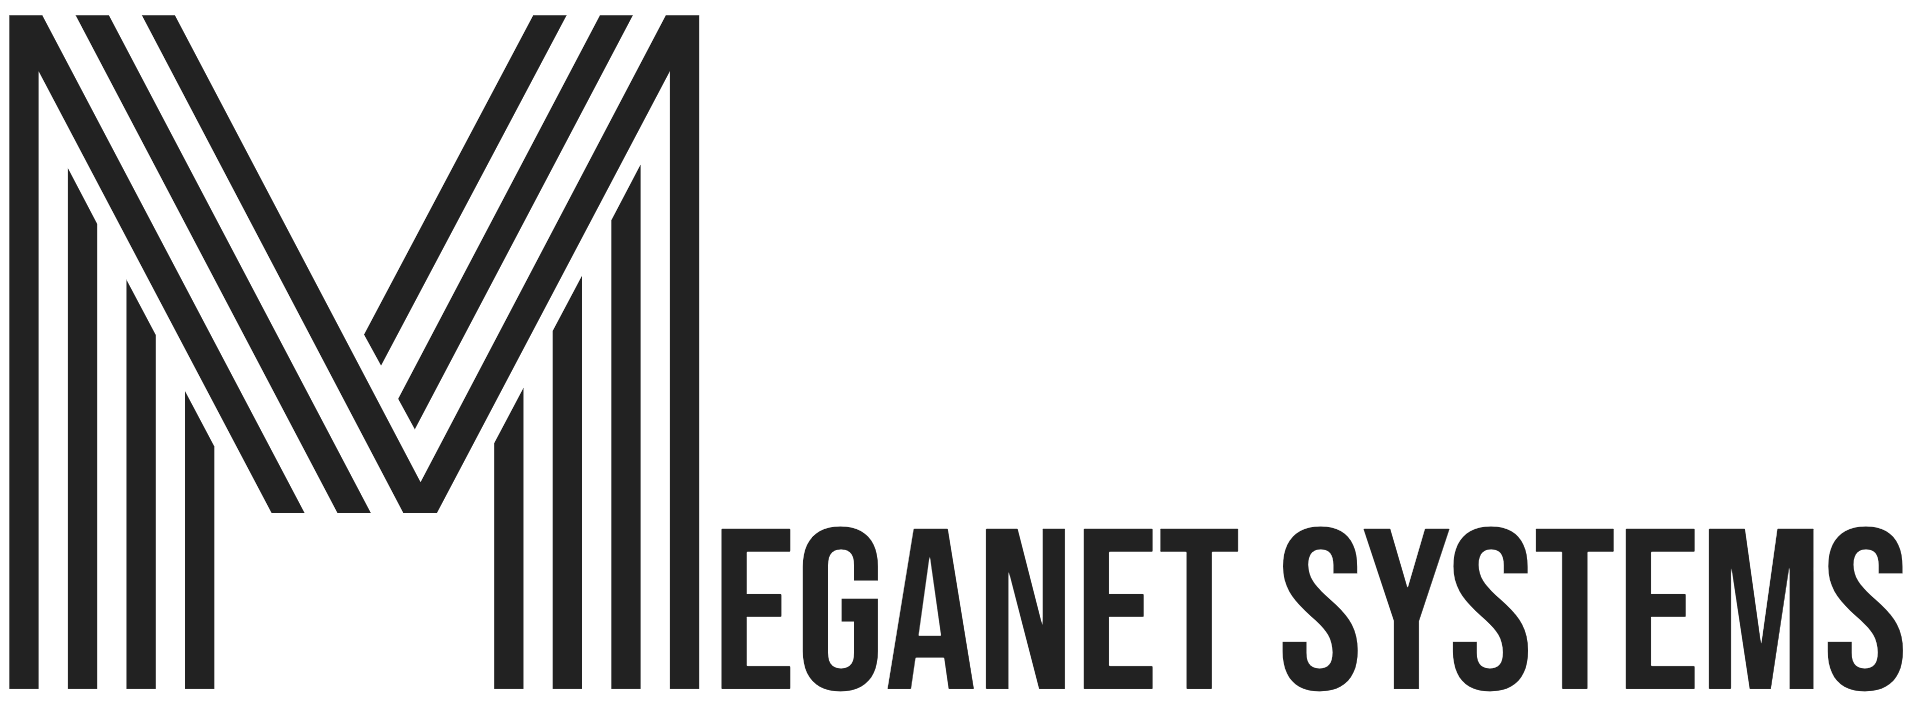 MegaNet Systems - Network Status